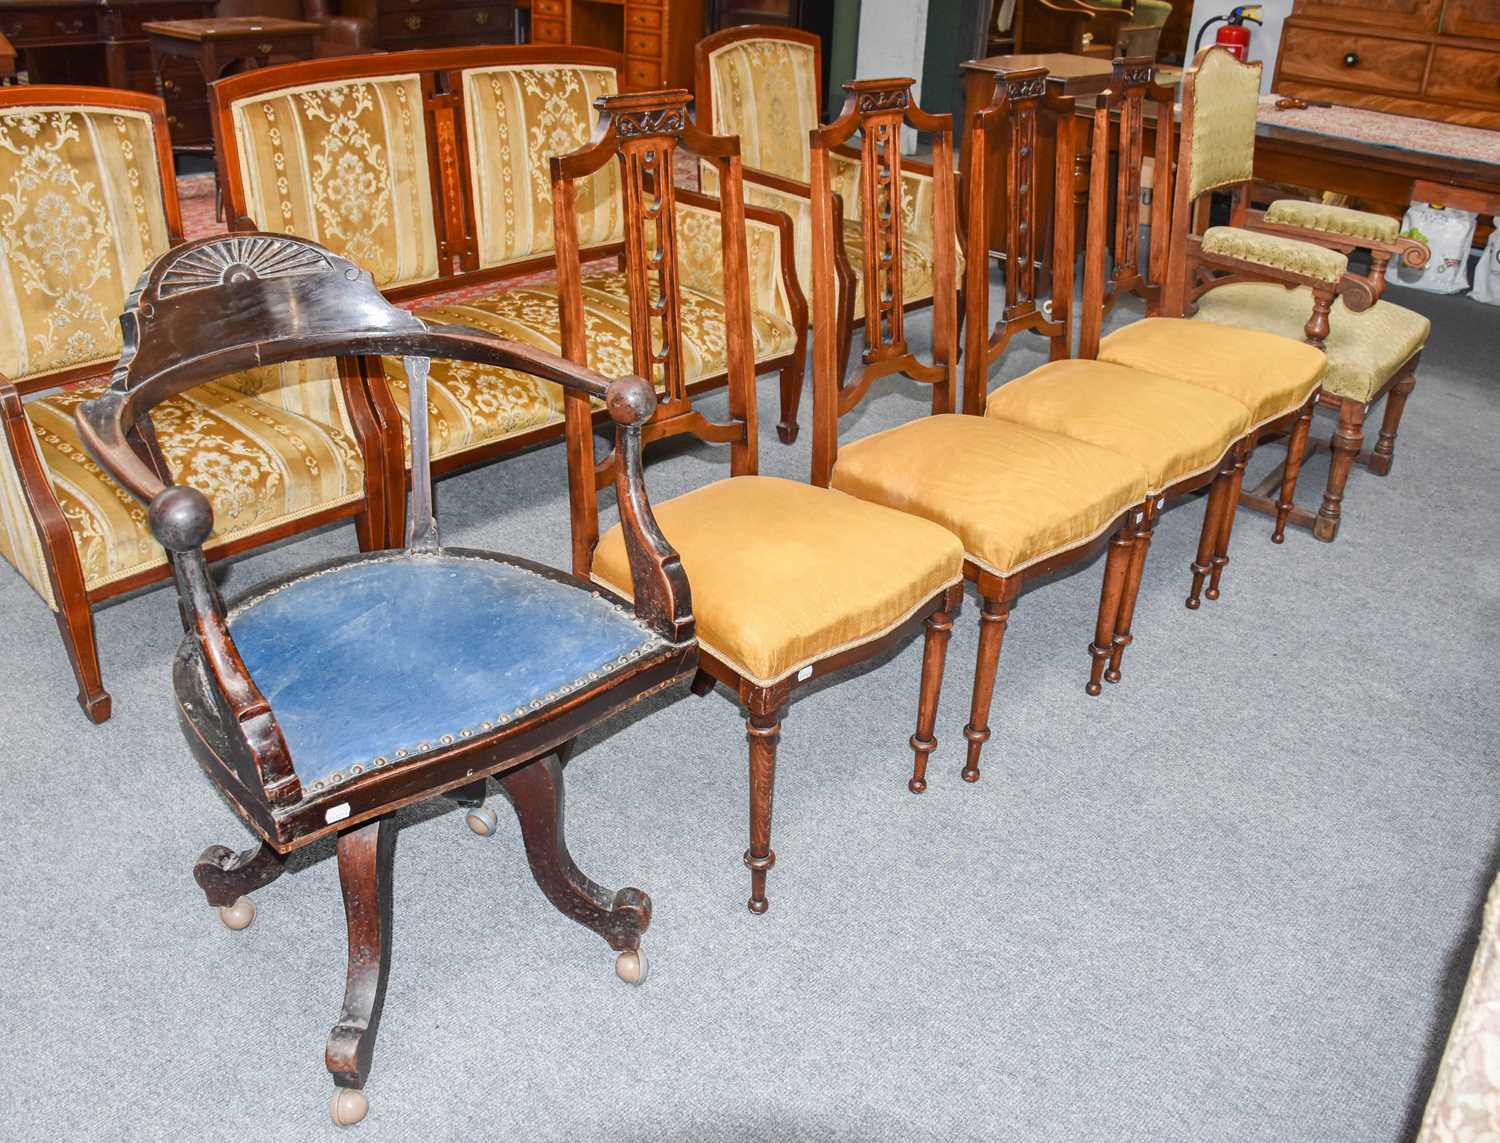 A Carved Mahogany Office Chair, circa 1910, with studded leather seat and later castors, A Set of